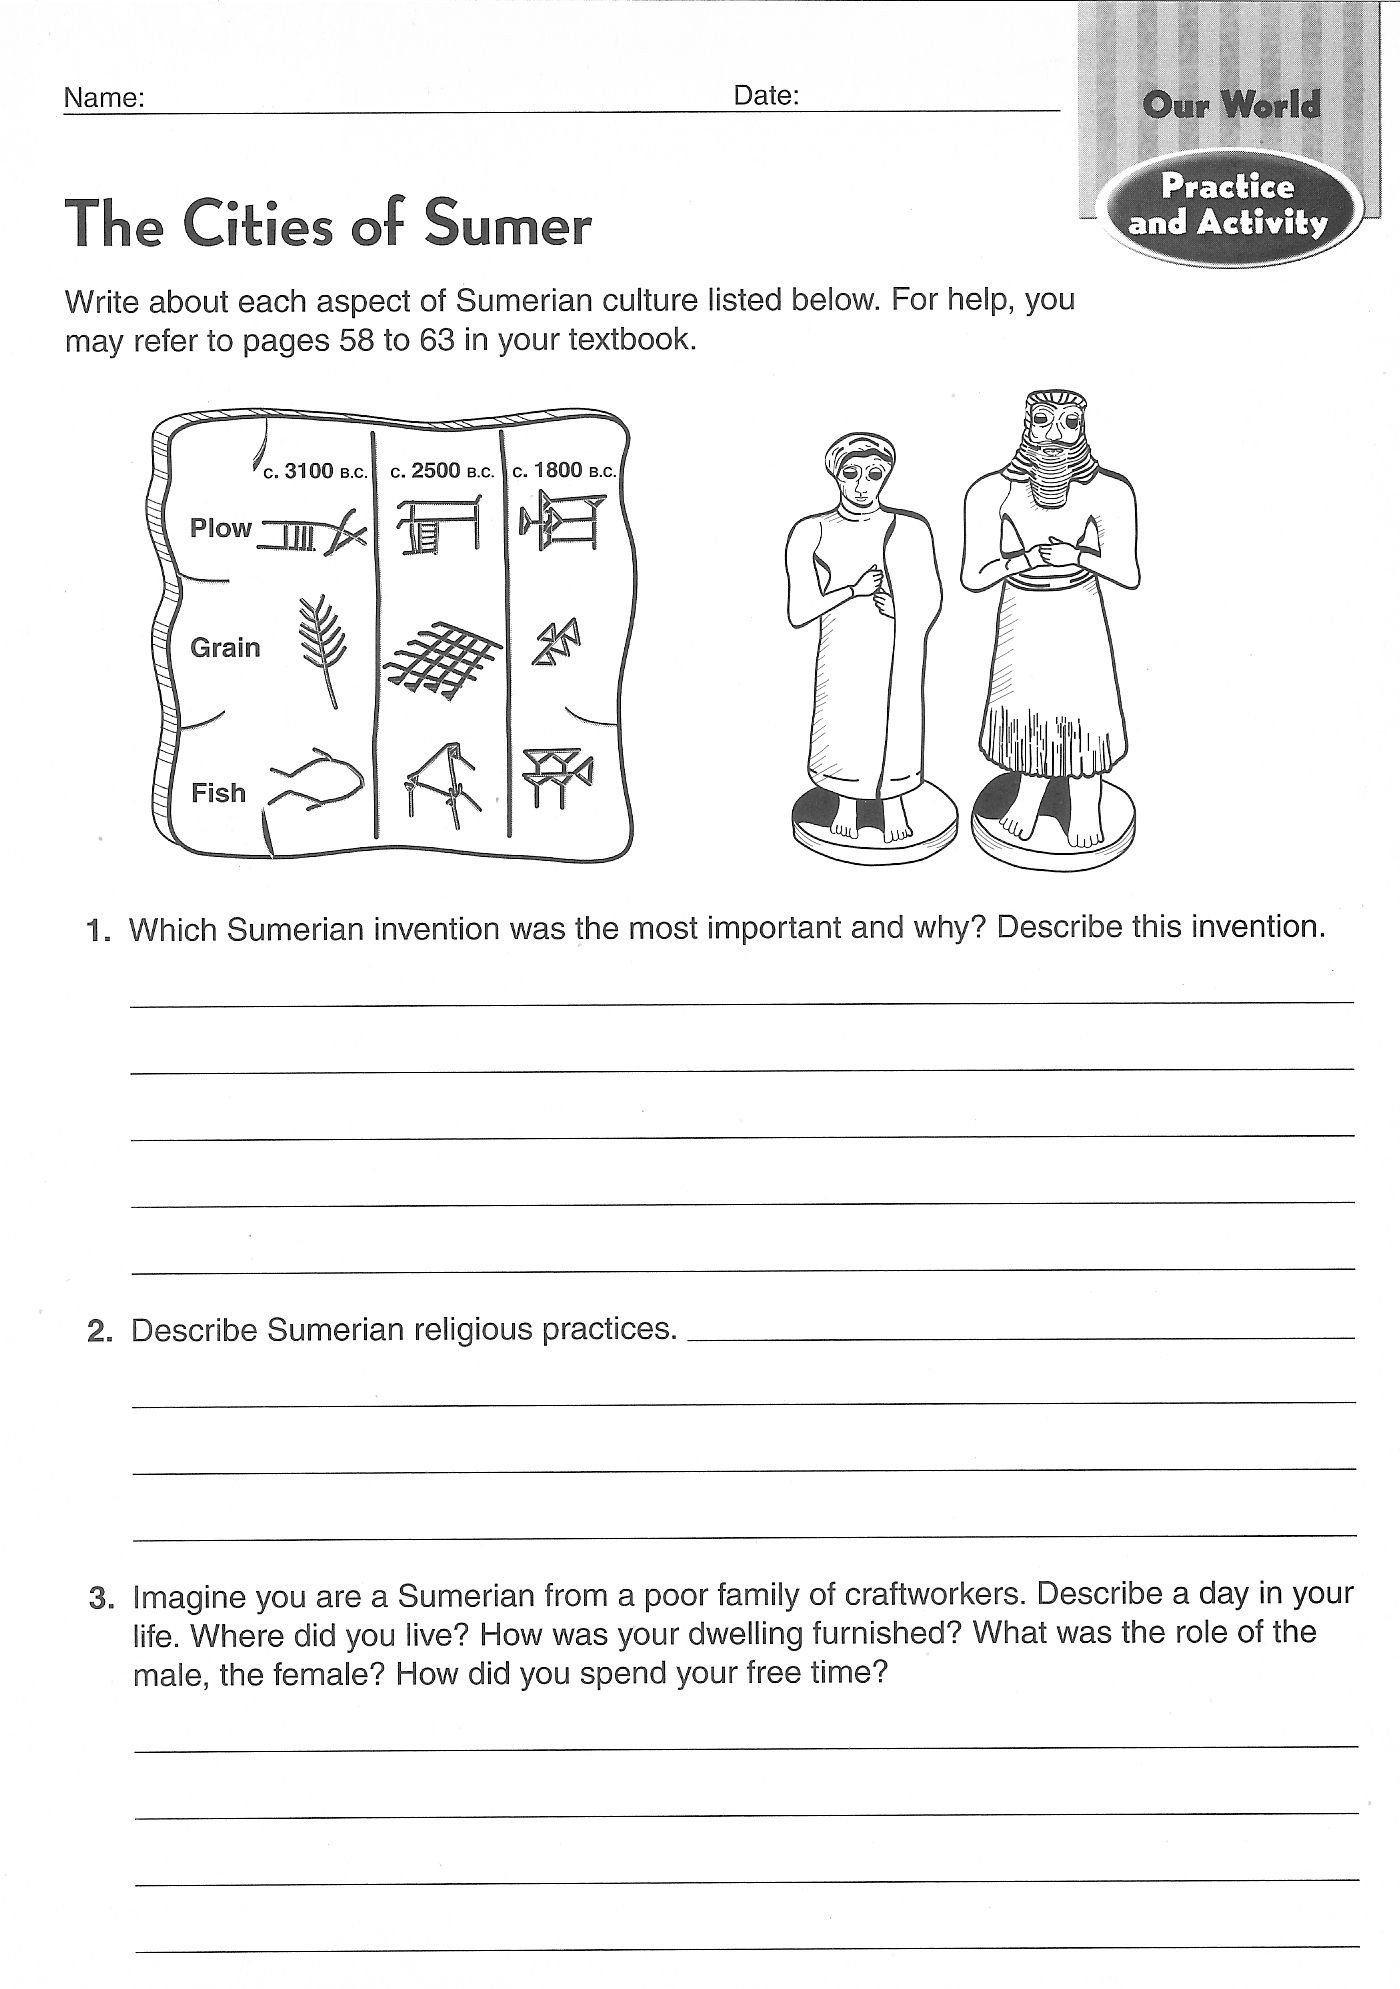 Branches Of Government Worksheet Pdf Branches Government Worksheet Pdf Pin by Lily Schafer